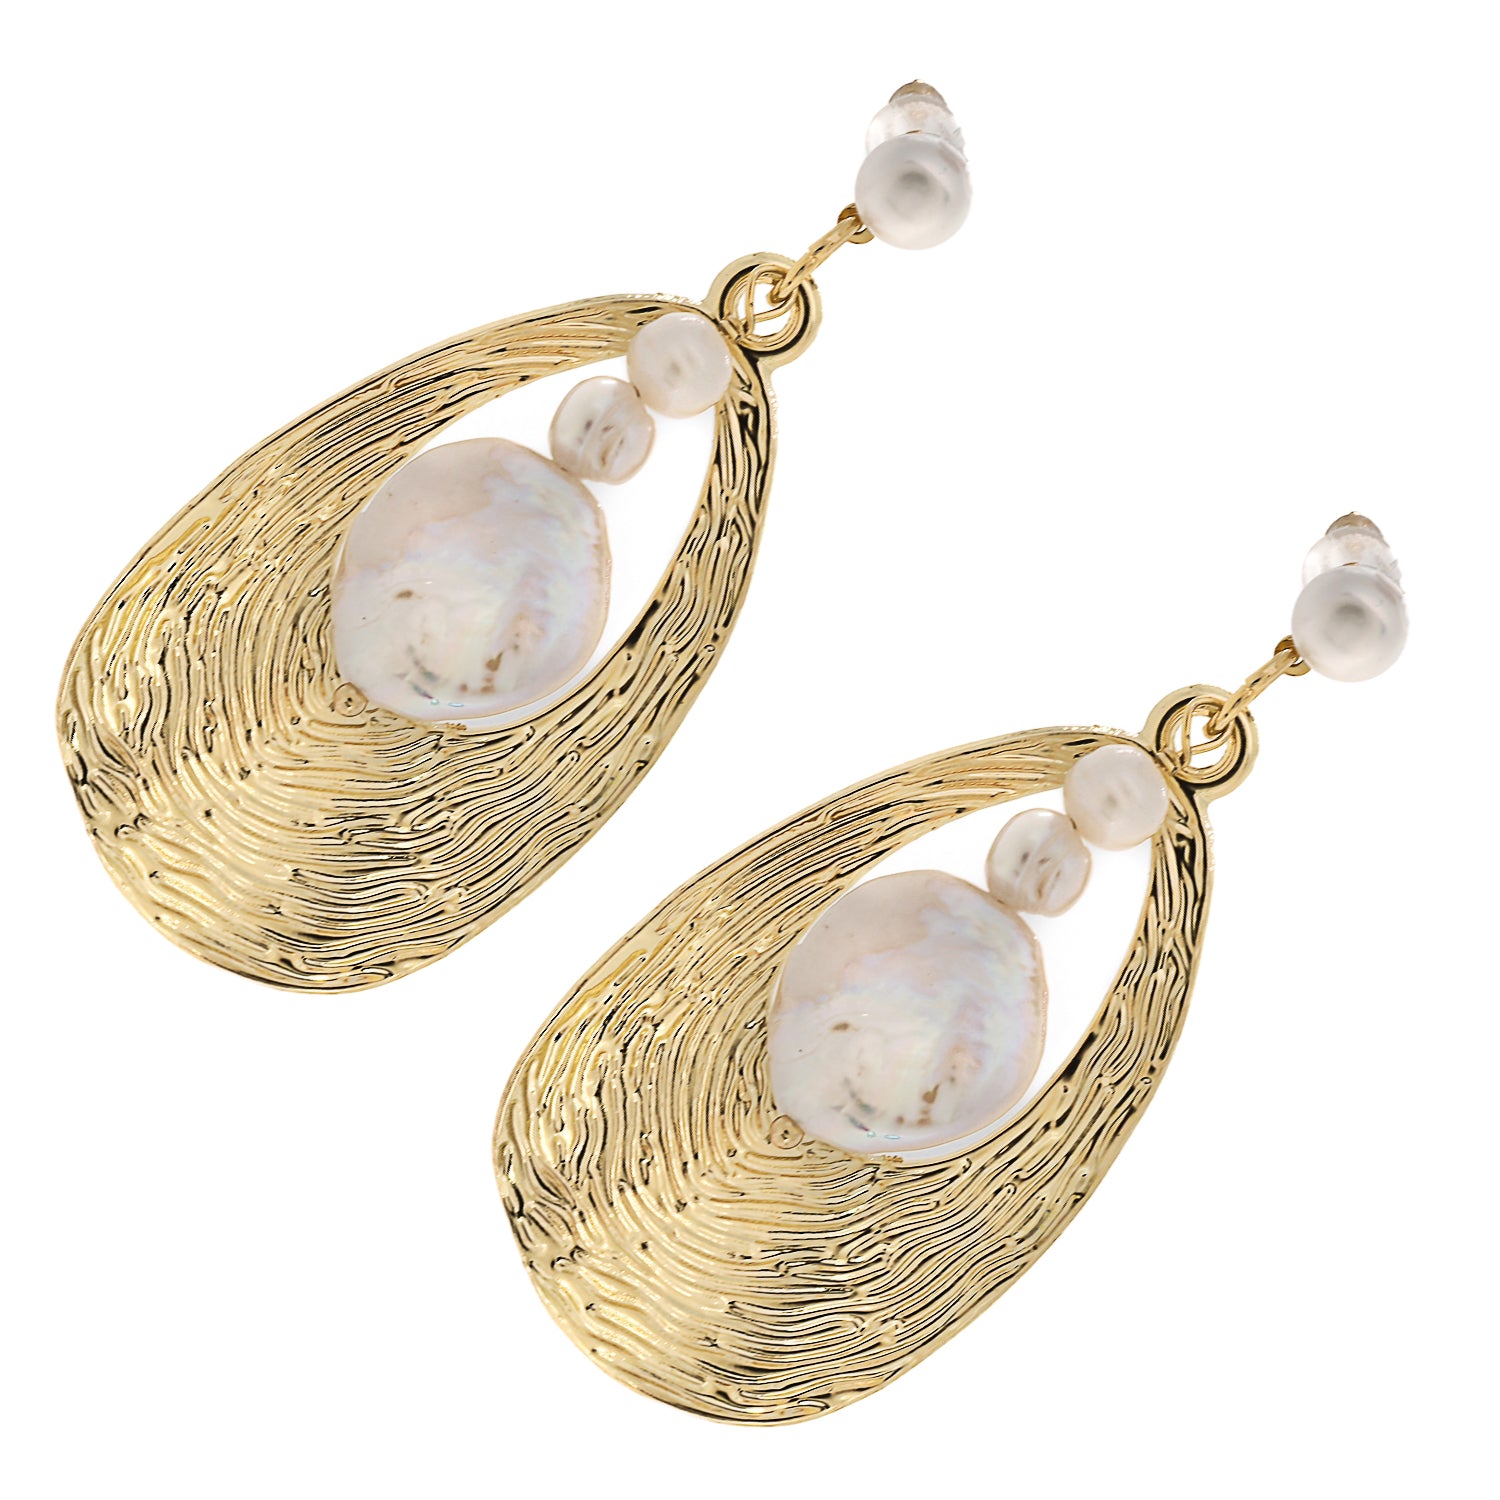 Boho Luxe: Cleopatra Earrings, 18K Gold Plated, Ethereal Pearls.